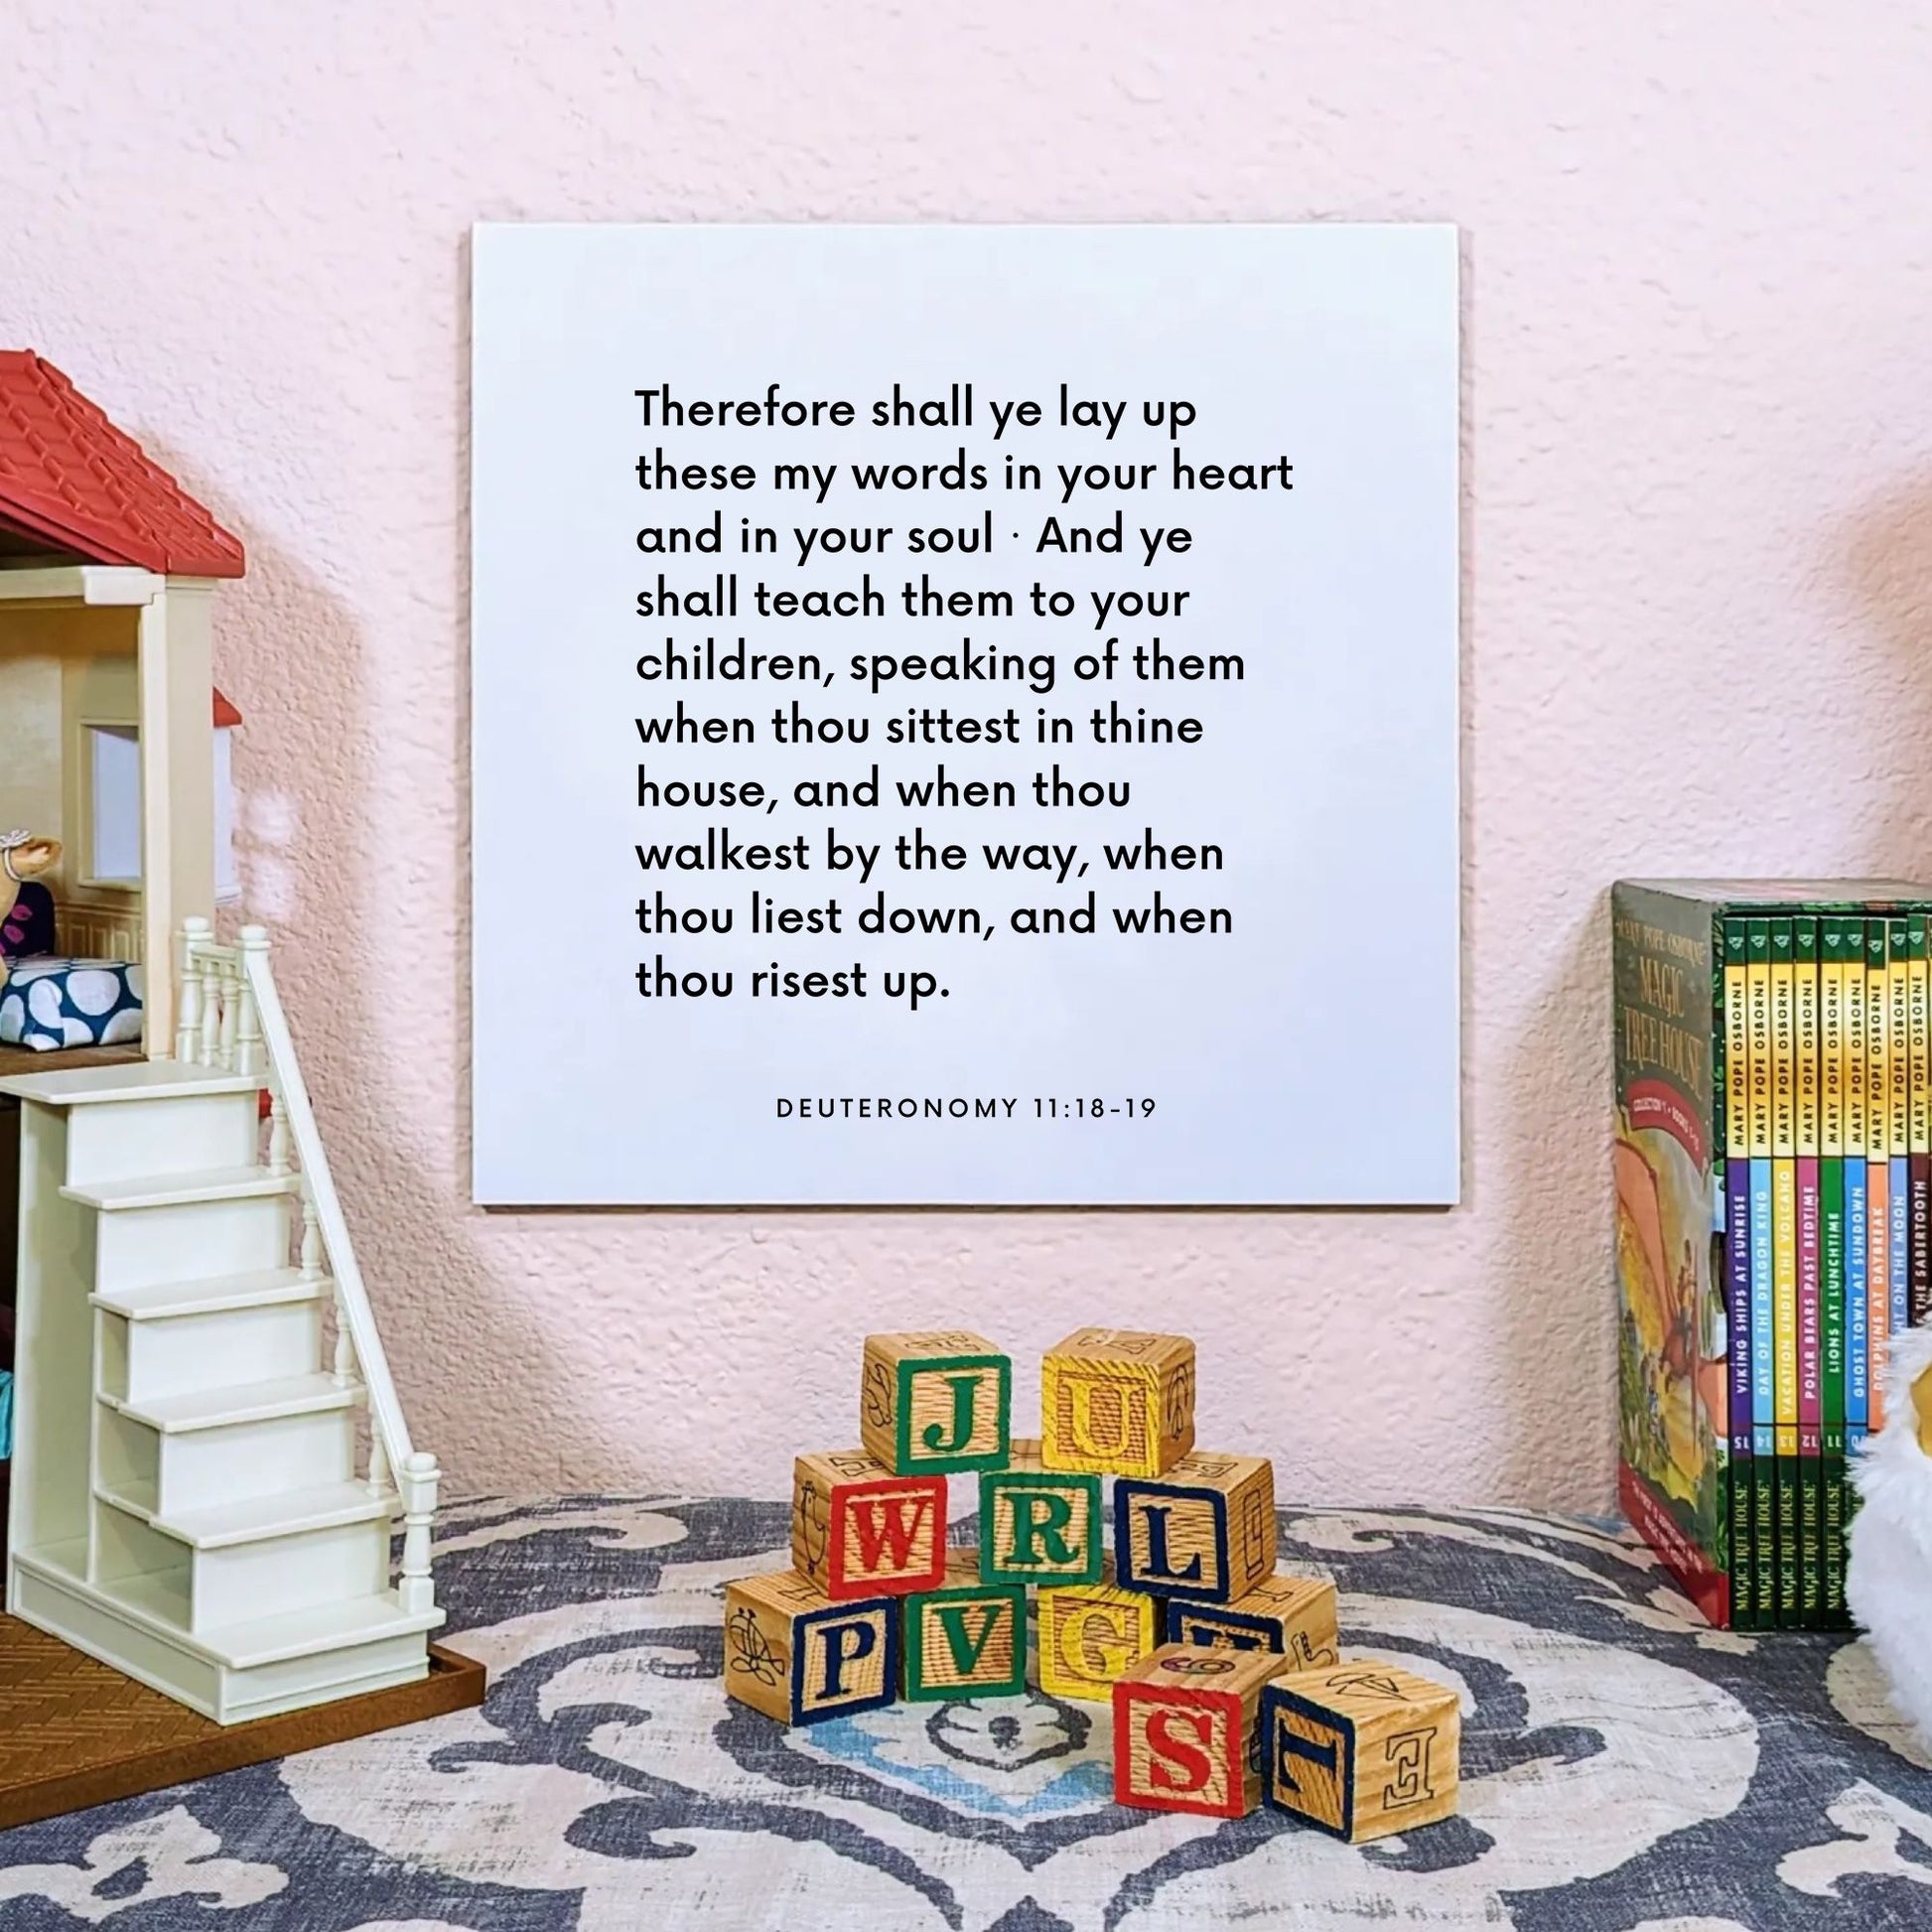 Playroom mouting of the scripture tile for Deuteronomy 11:18-19 - "Lay up these my words in your heart and in your soul"